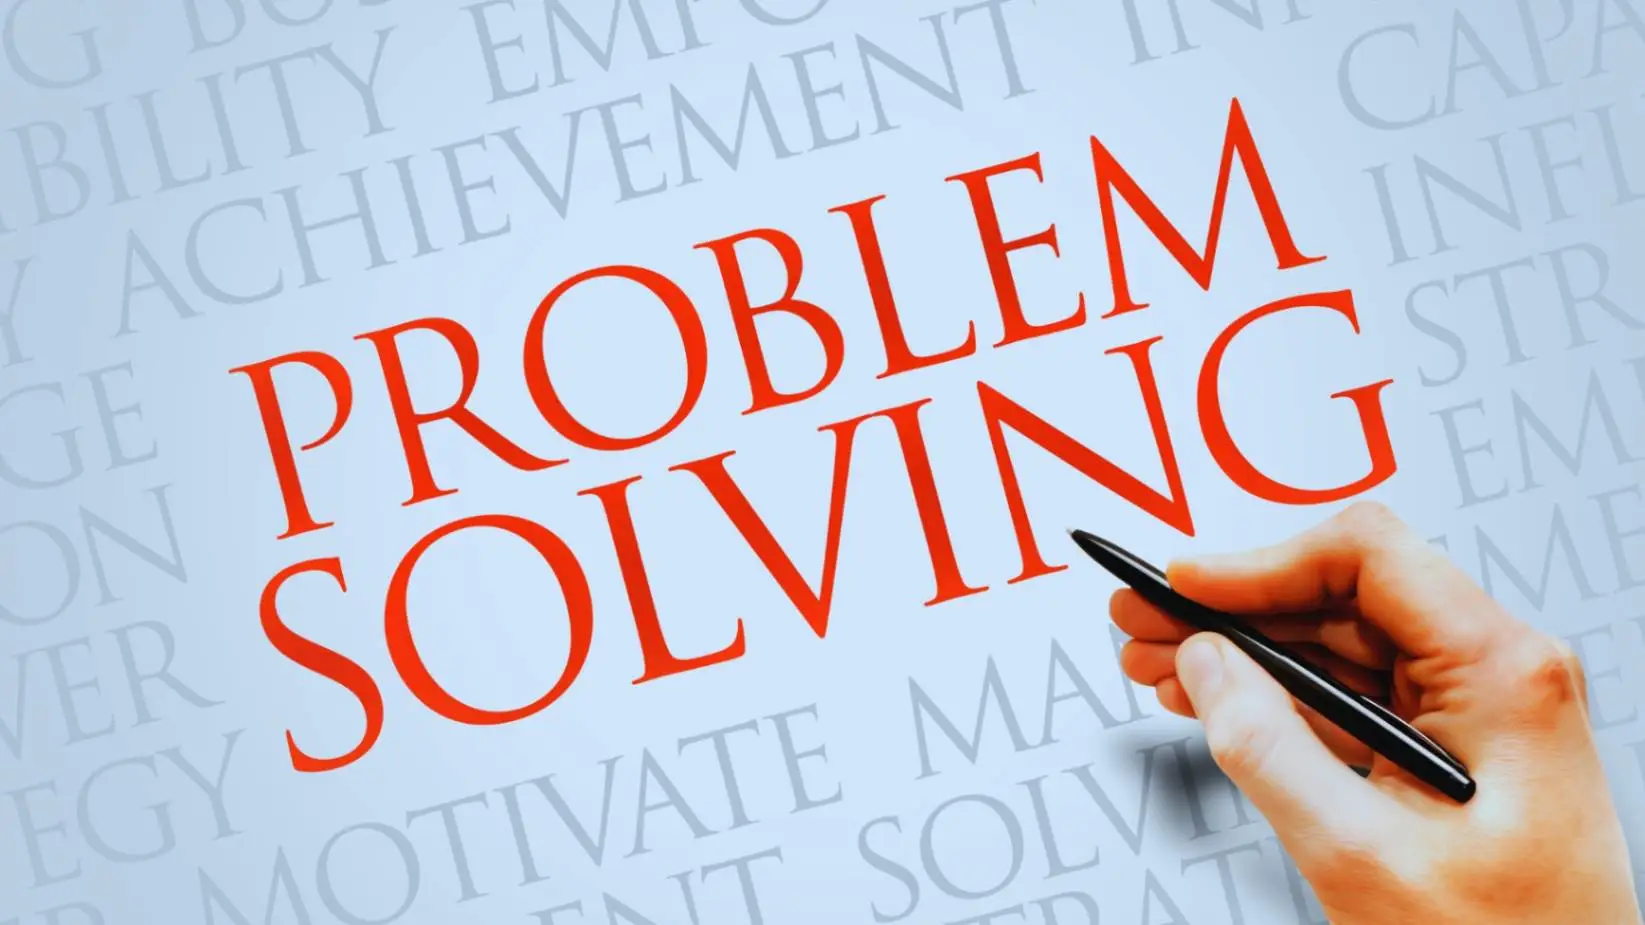 "Hand writing 'Problem Solving' in bold red letters on a white background with related motivational words like 'strategy', 'motivation', and 'achievement'."